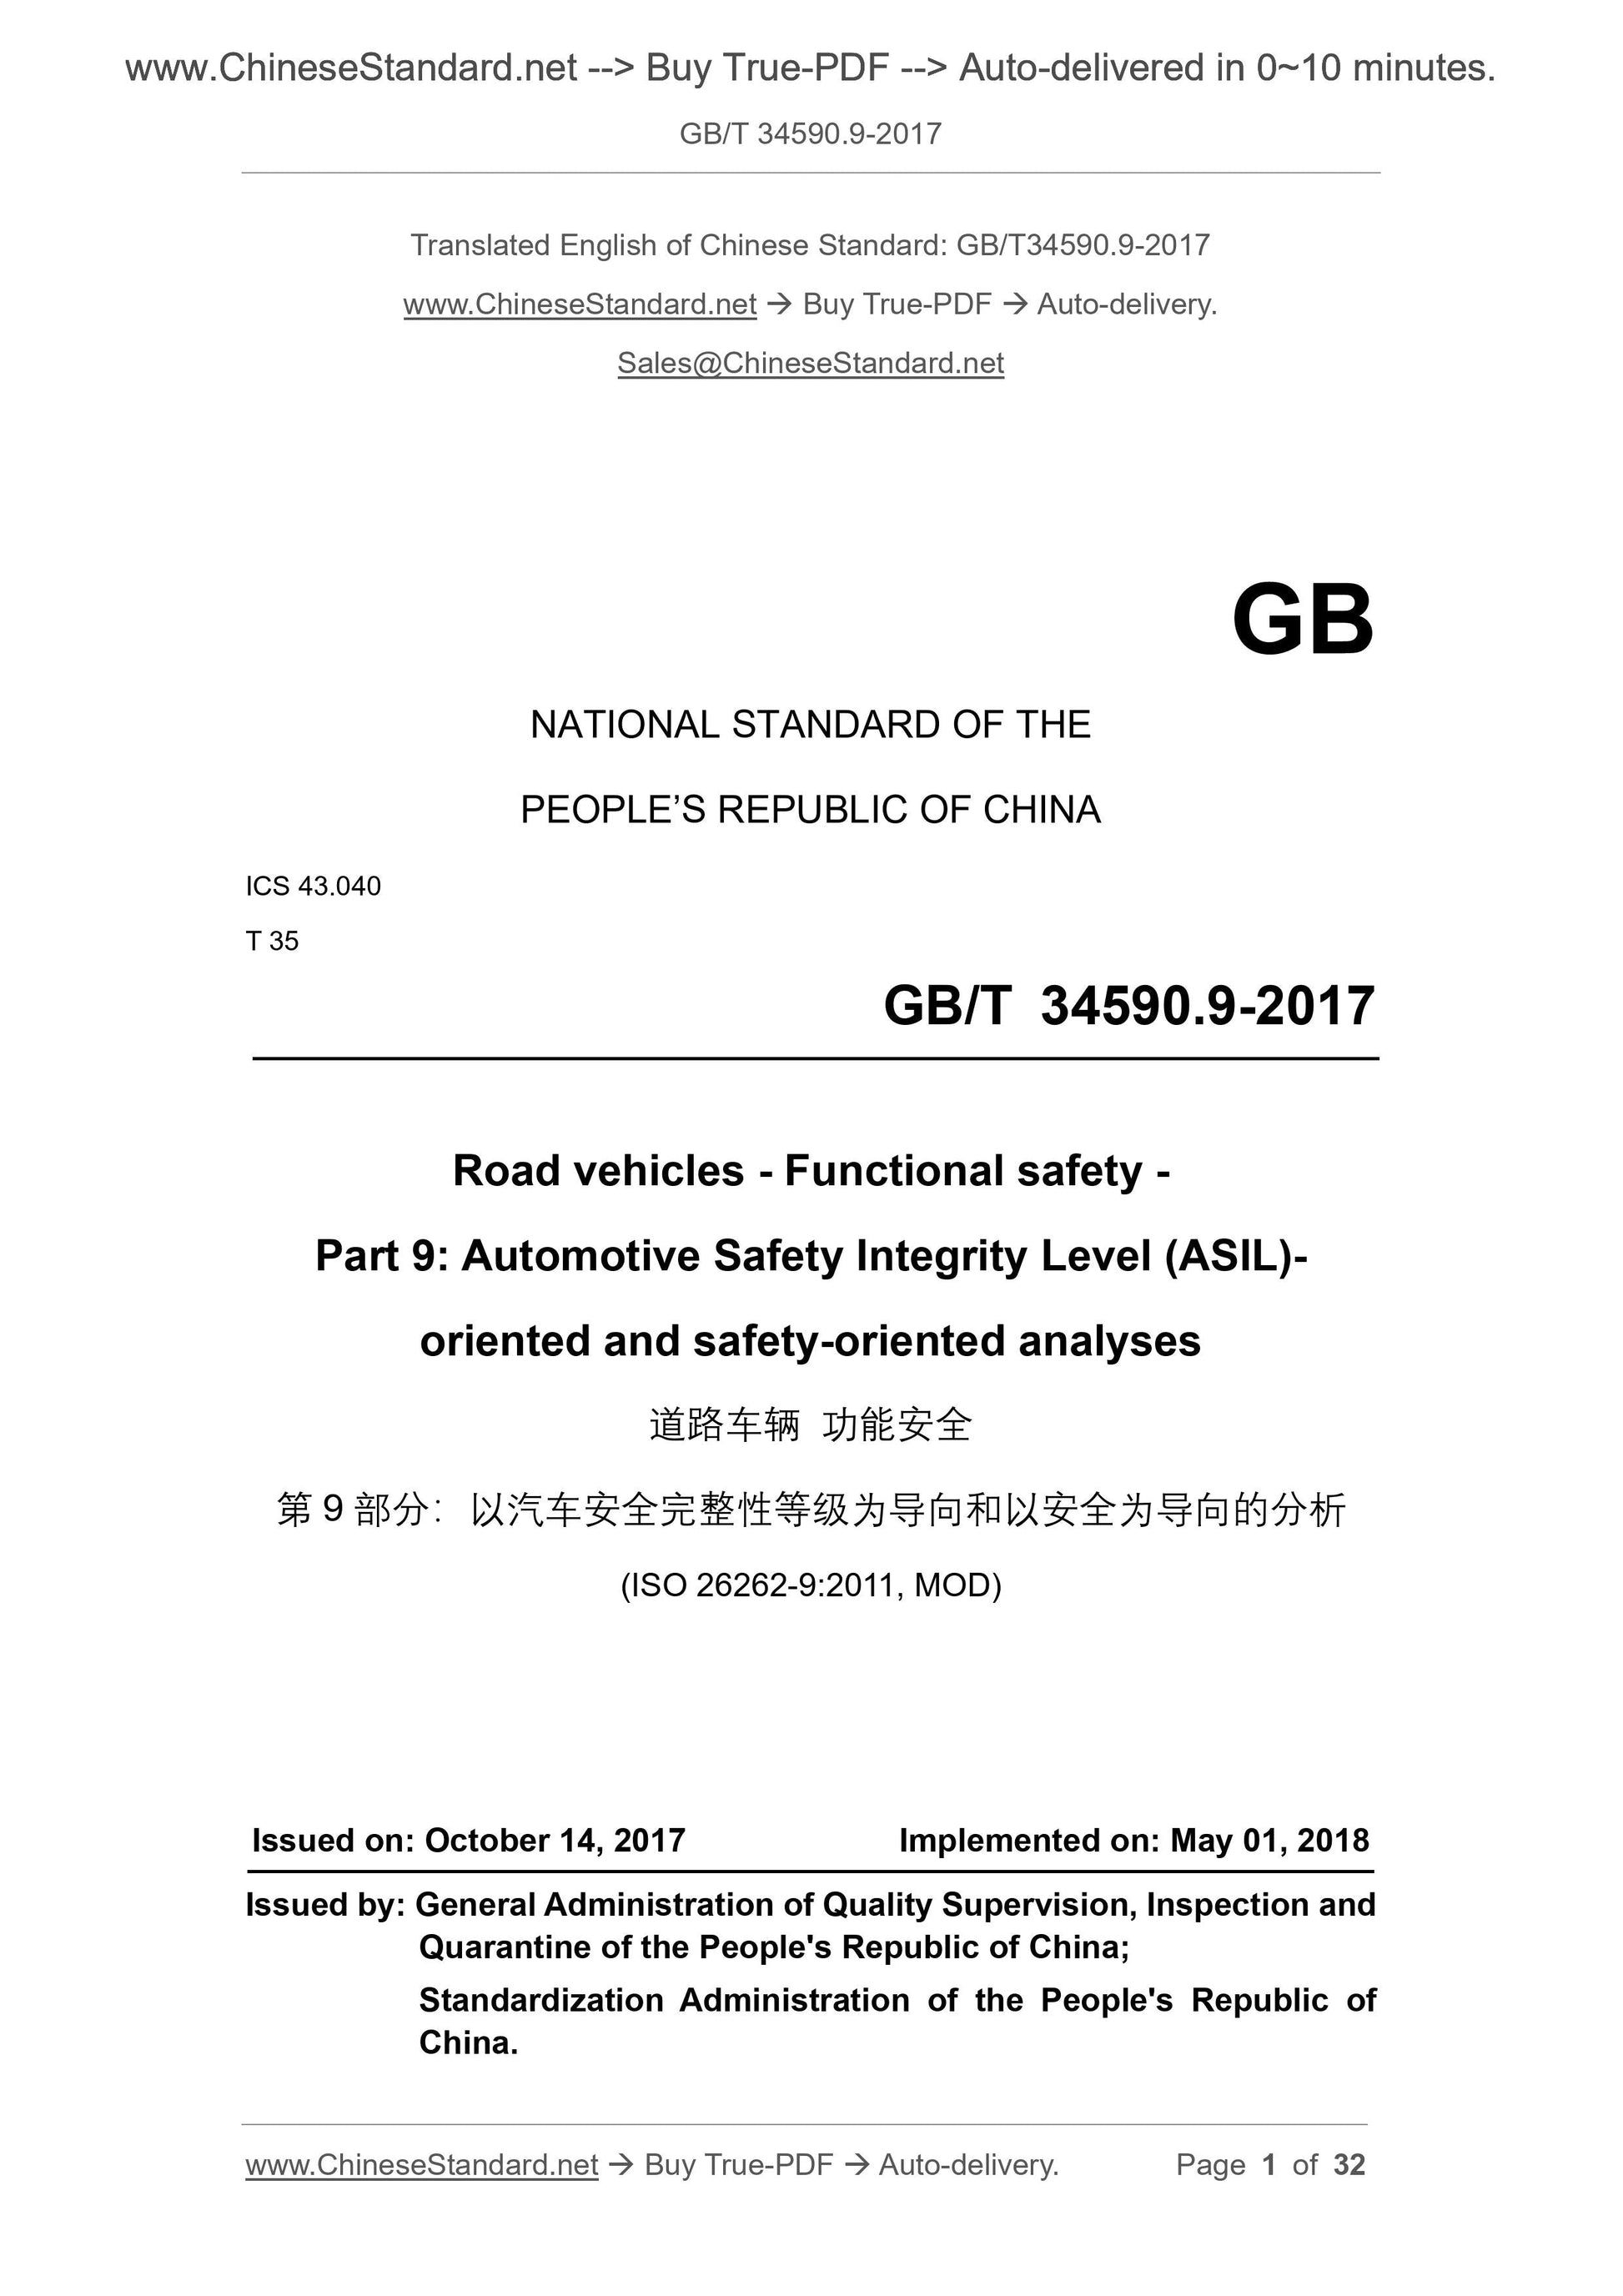 GB/T 34590.9-2017 Page 1